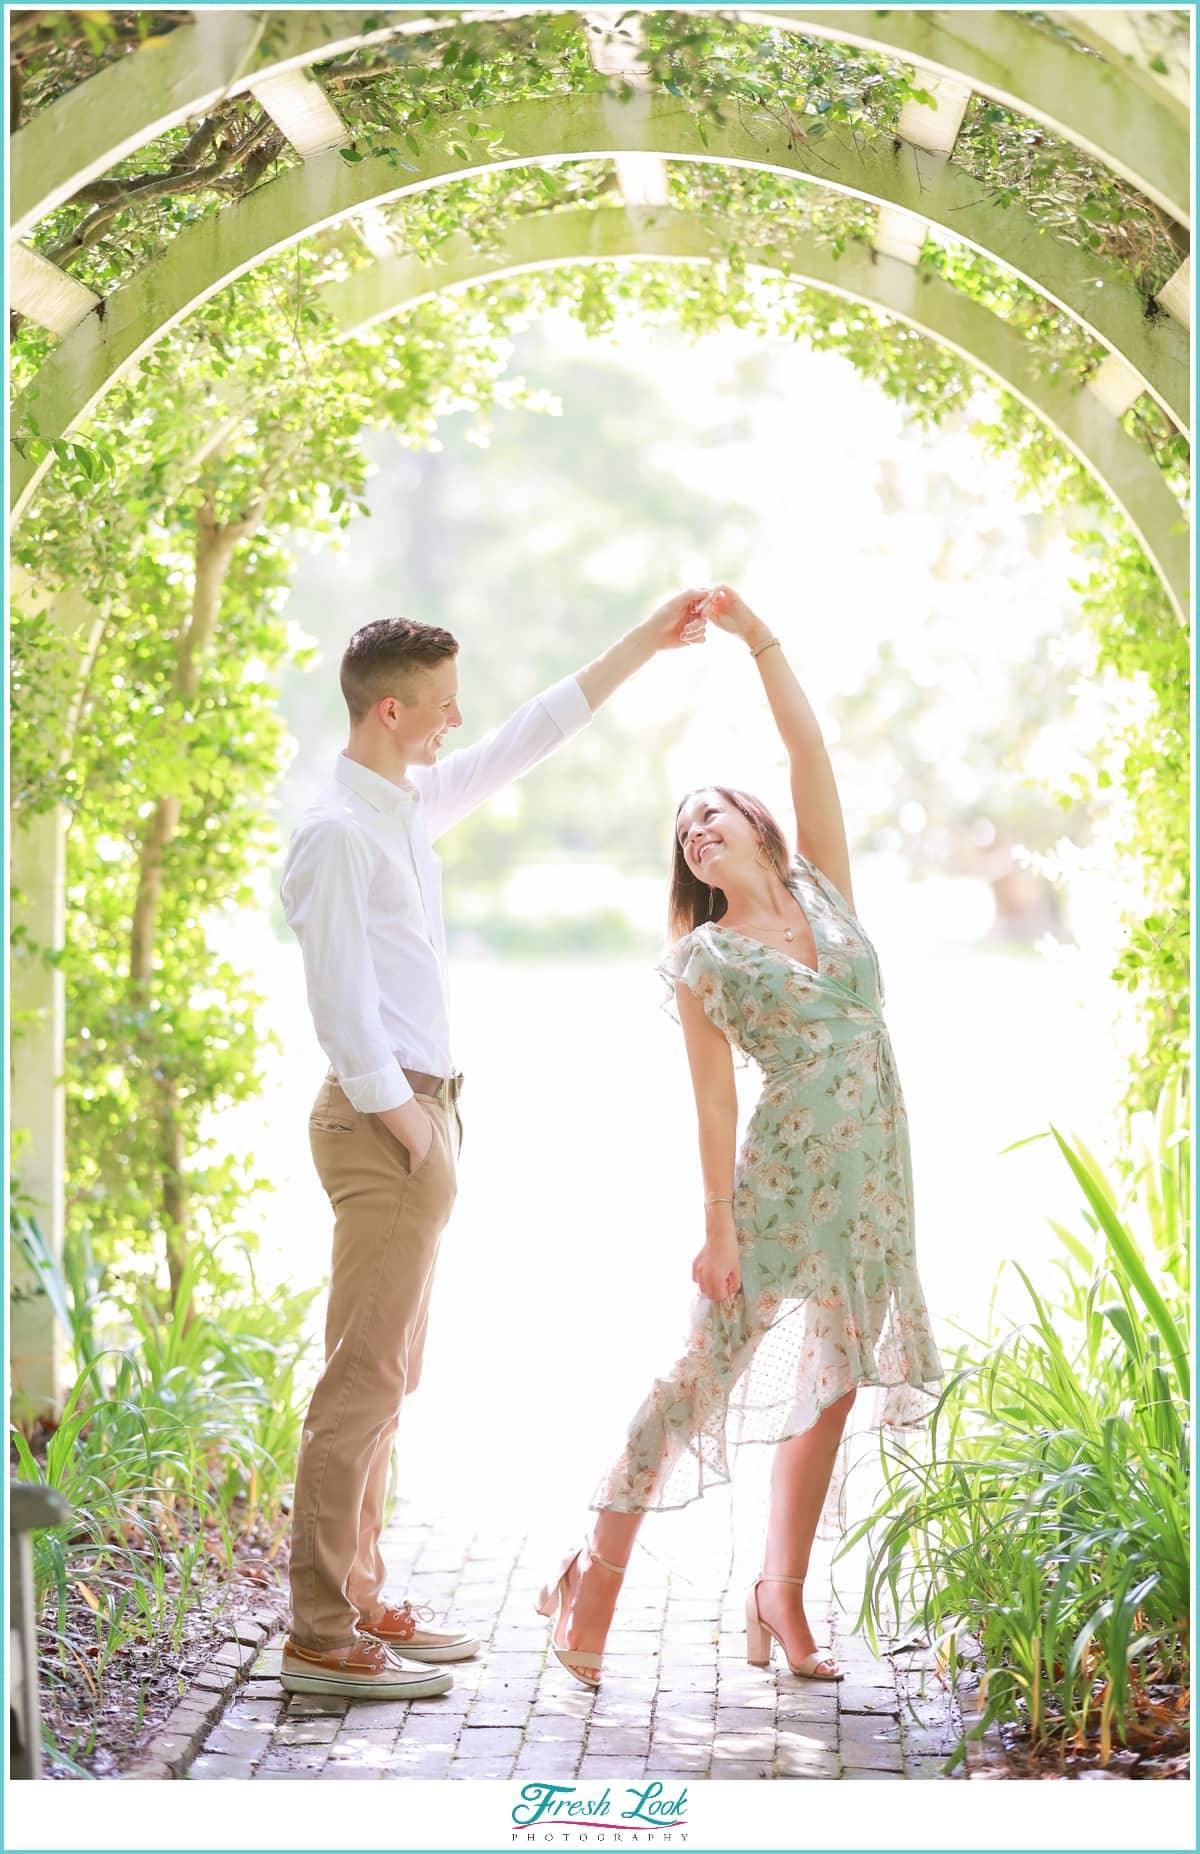 Dancing at the engagement session